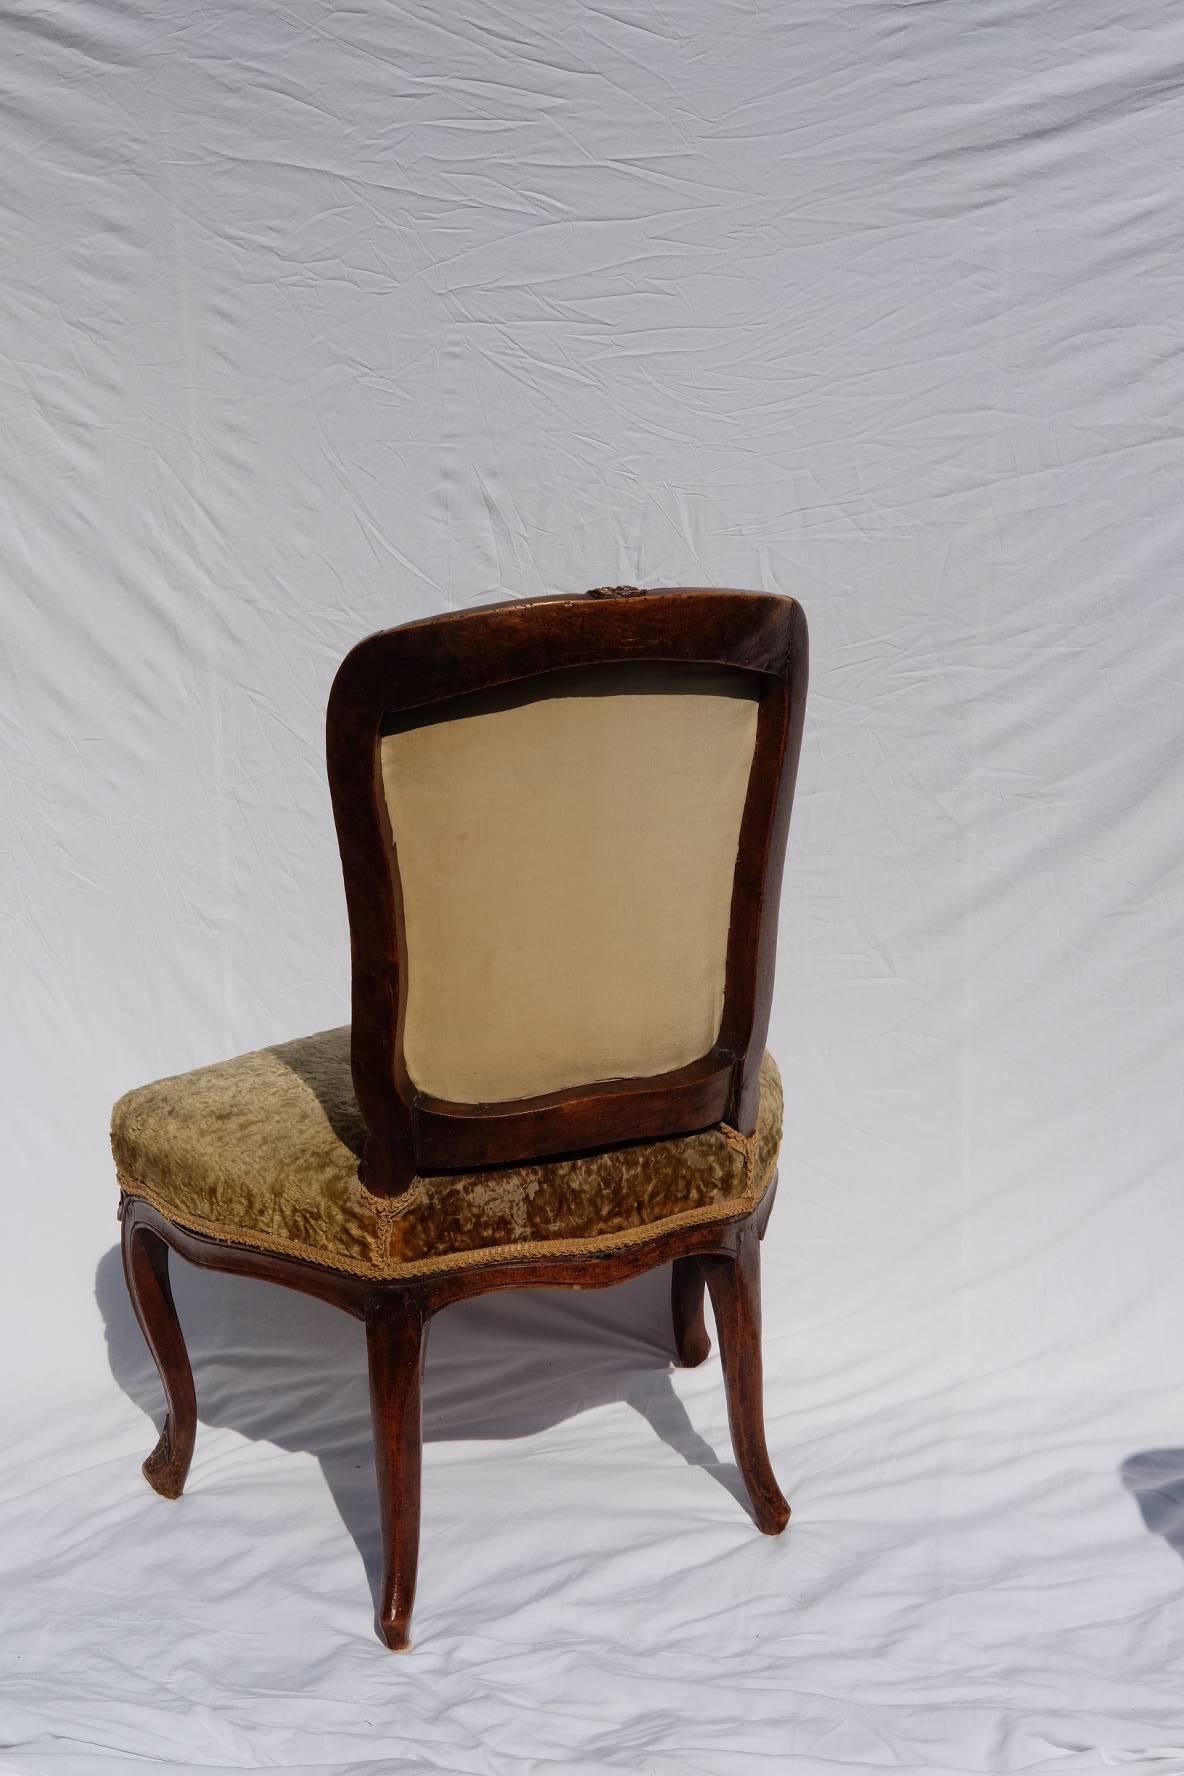 One single chauffeuse, 18th century, upholstered in a strié yellow gold velvet. Good condition.